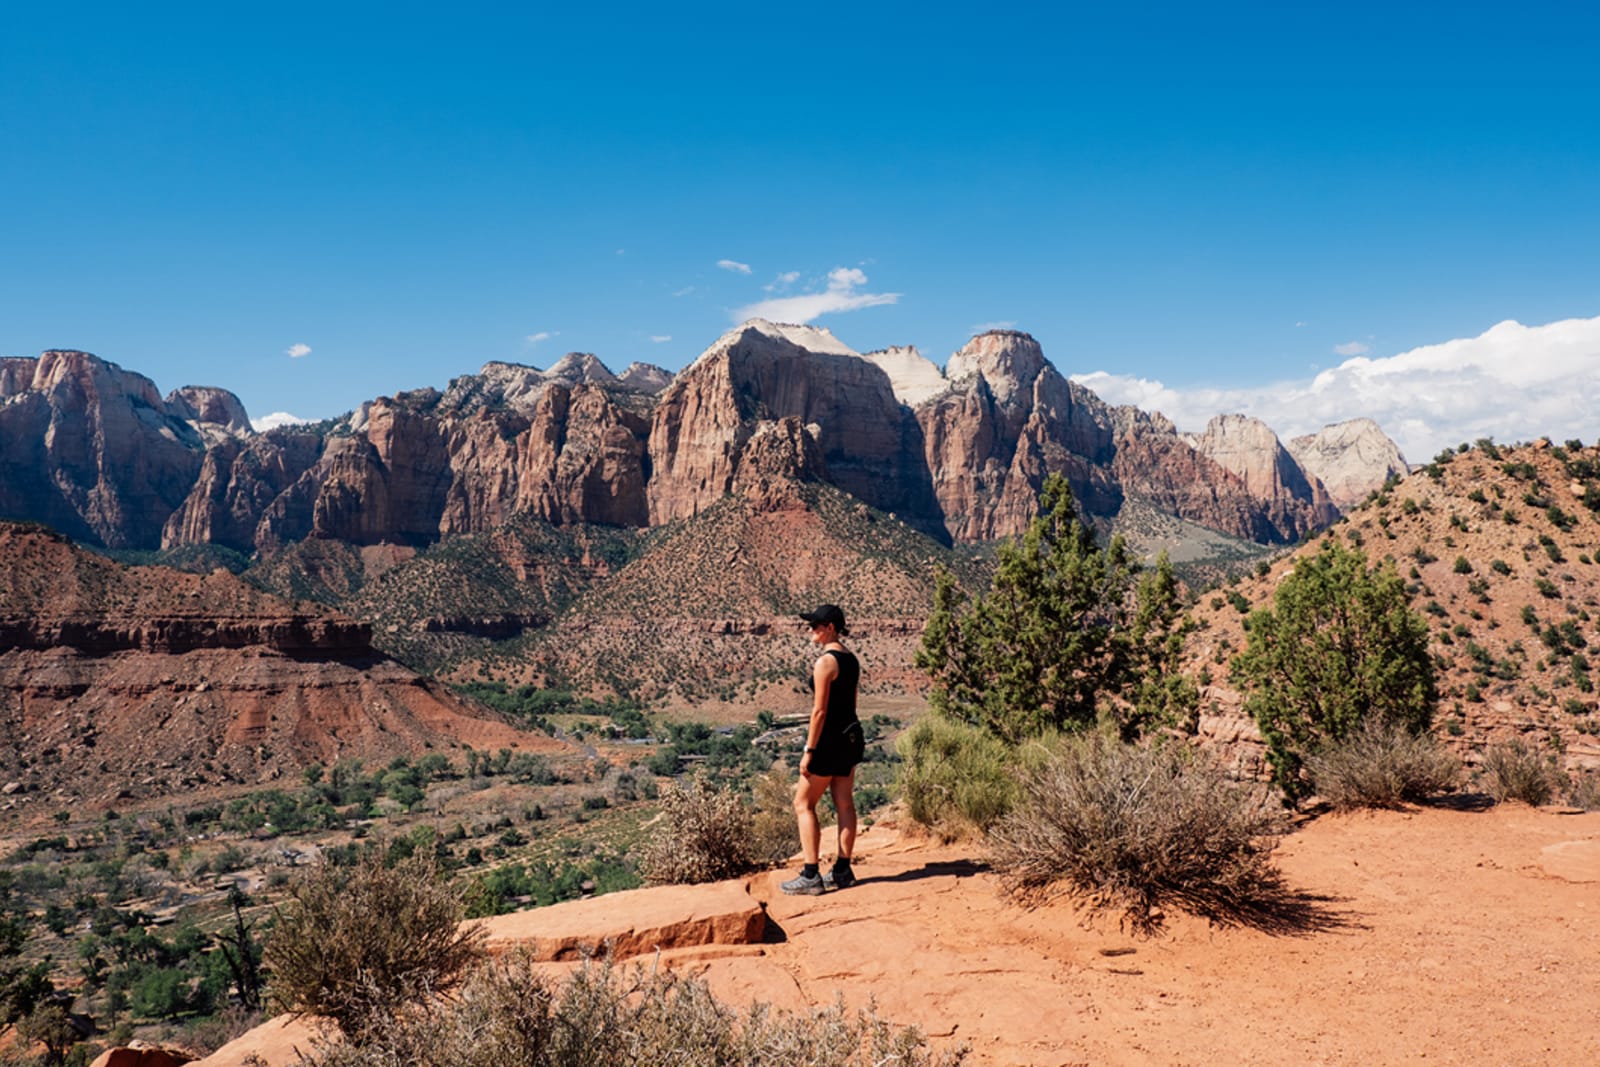 A person admiring the natural beauty of Zion National Park